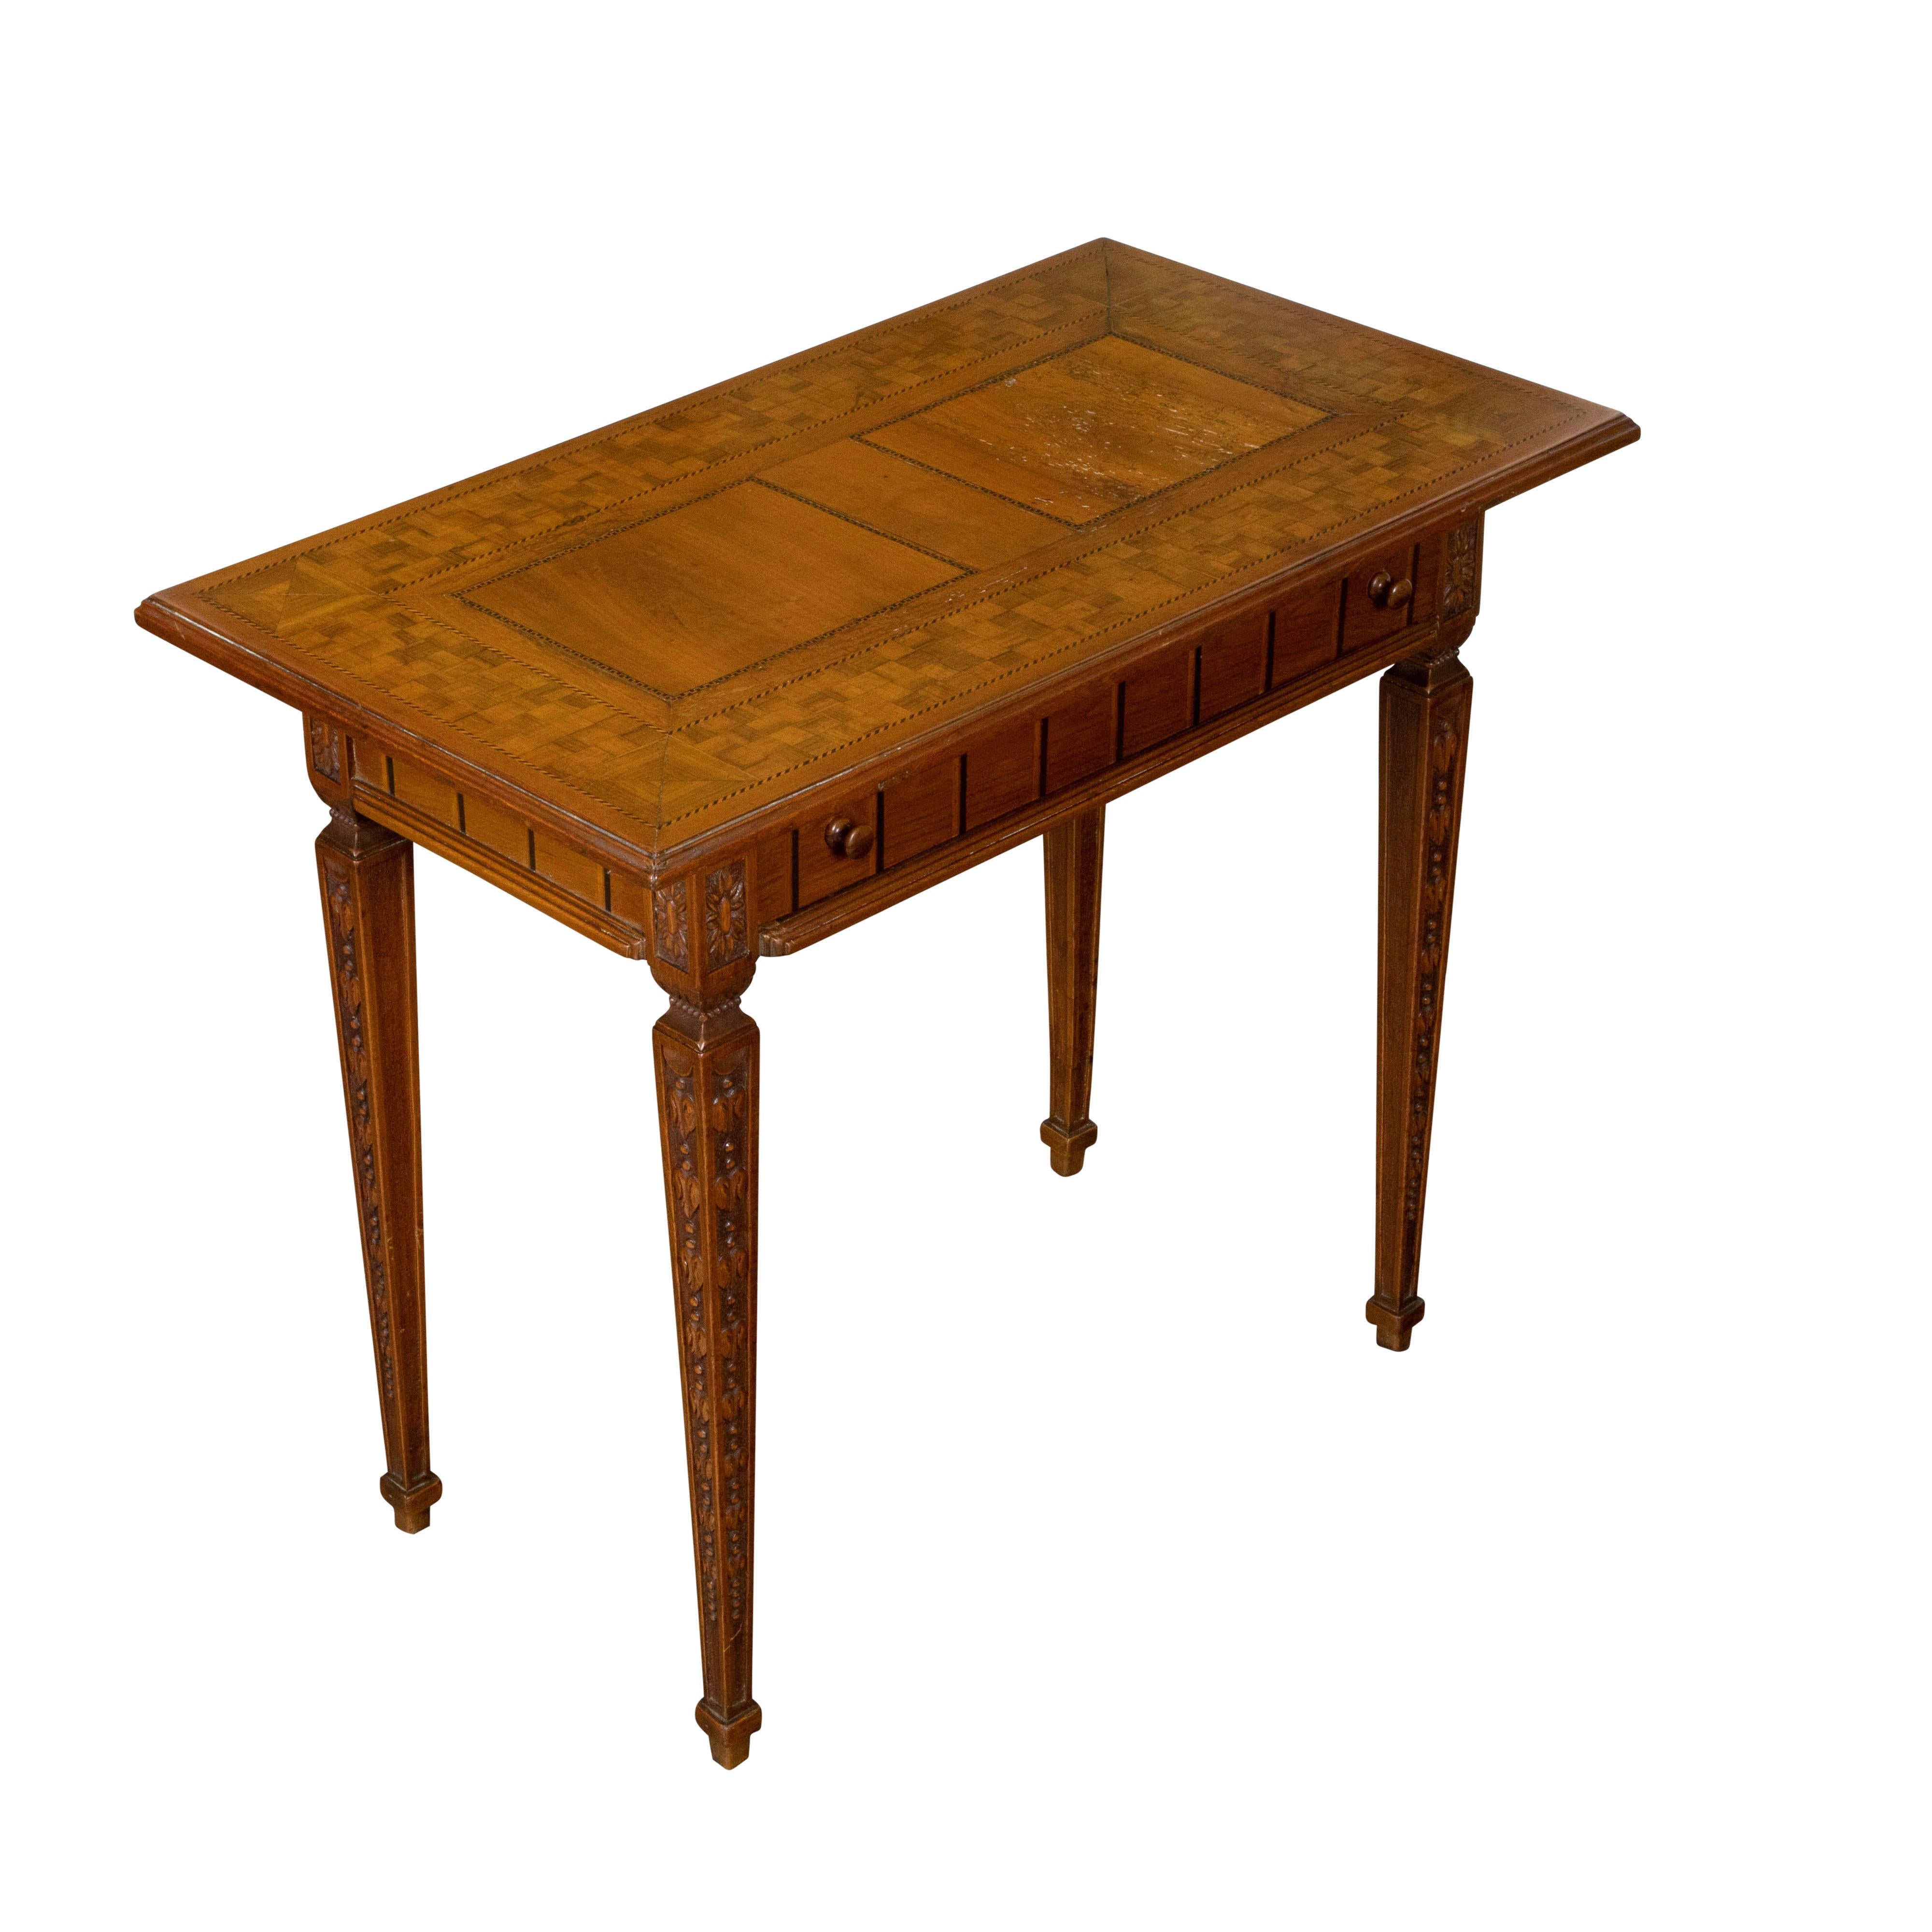 French Napoléon III Period Walnut Side Table with Inlaid Décor and Single Drawer For Sale 1